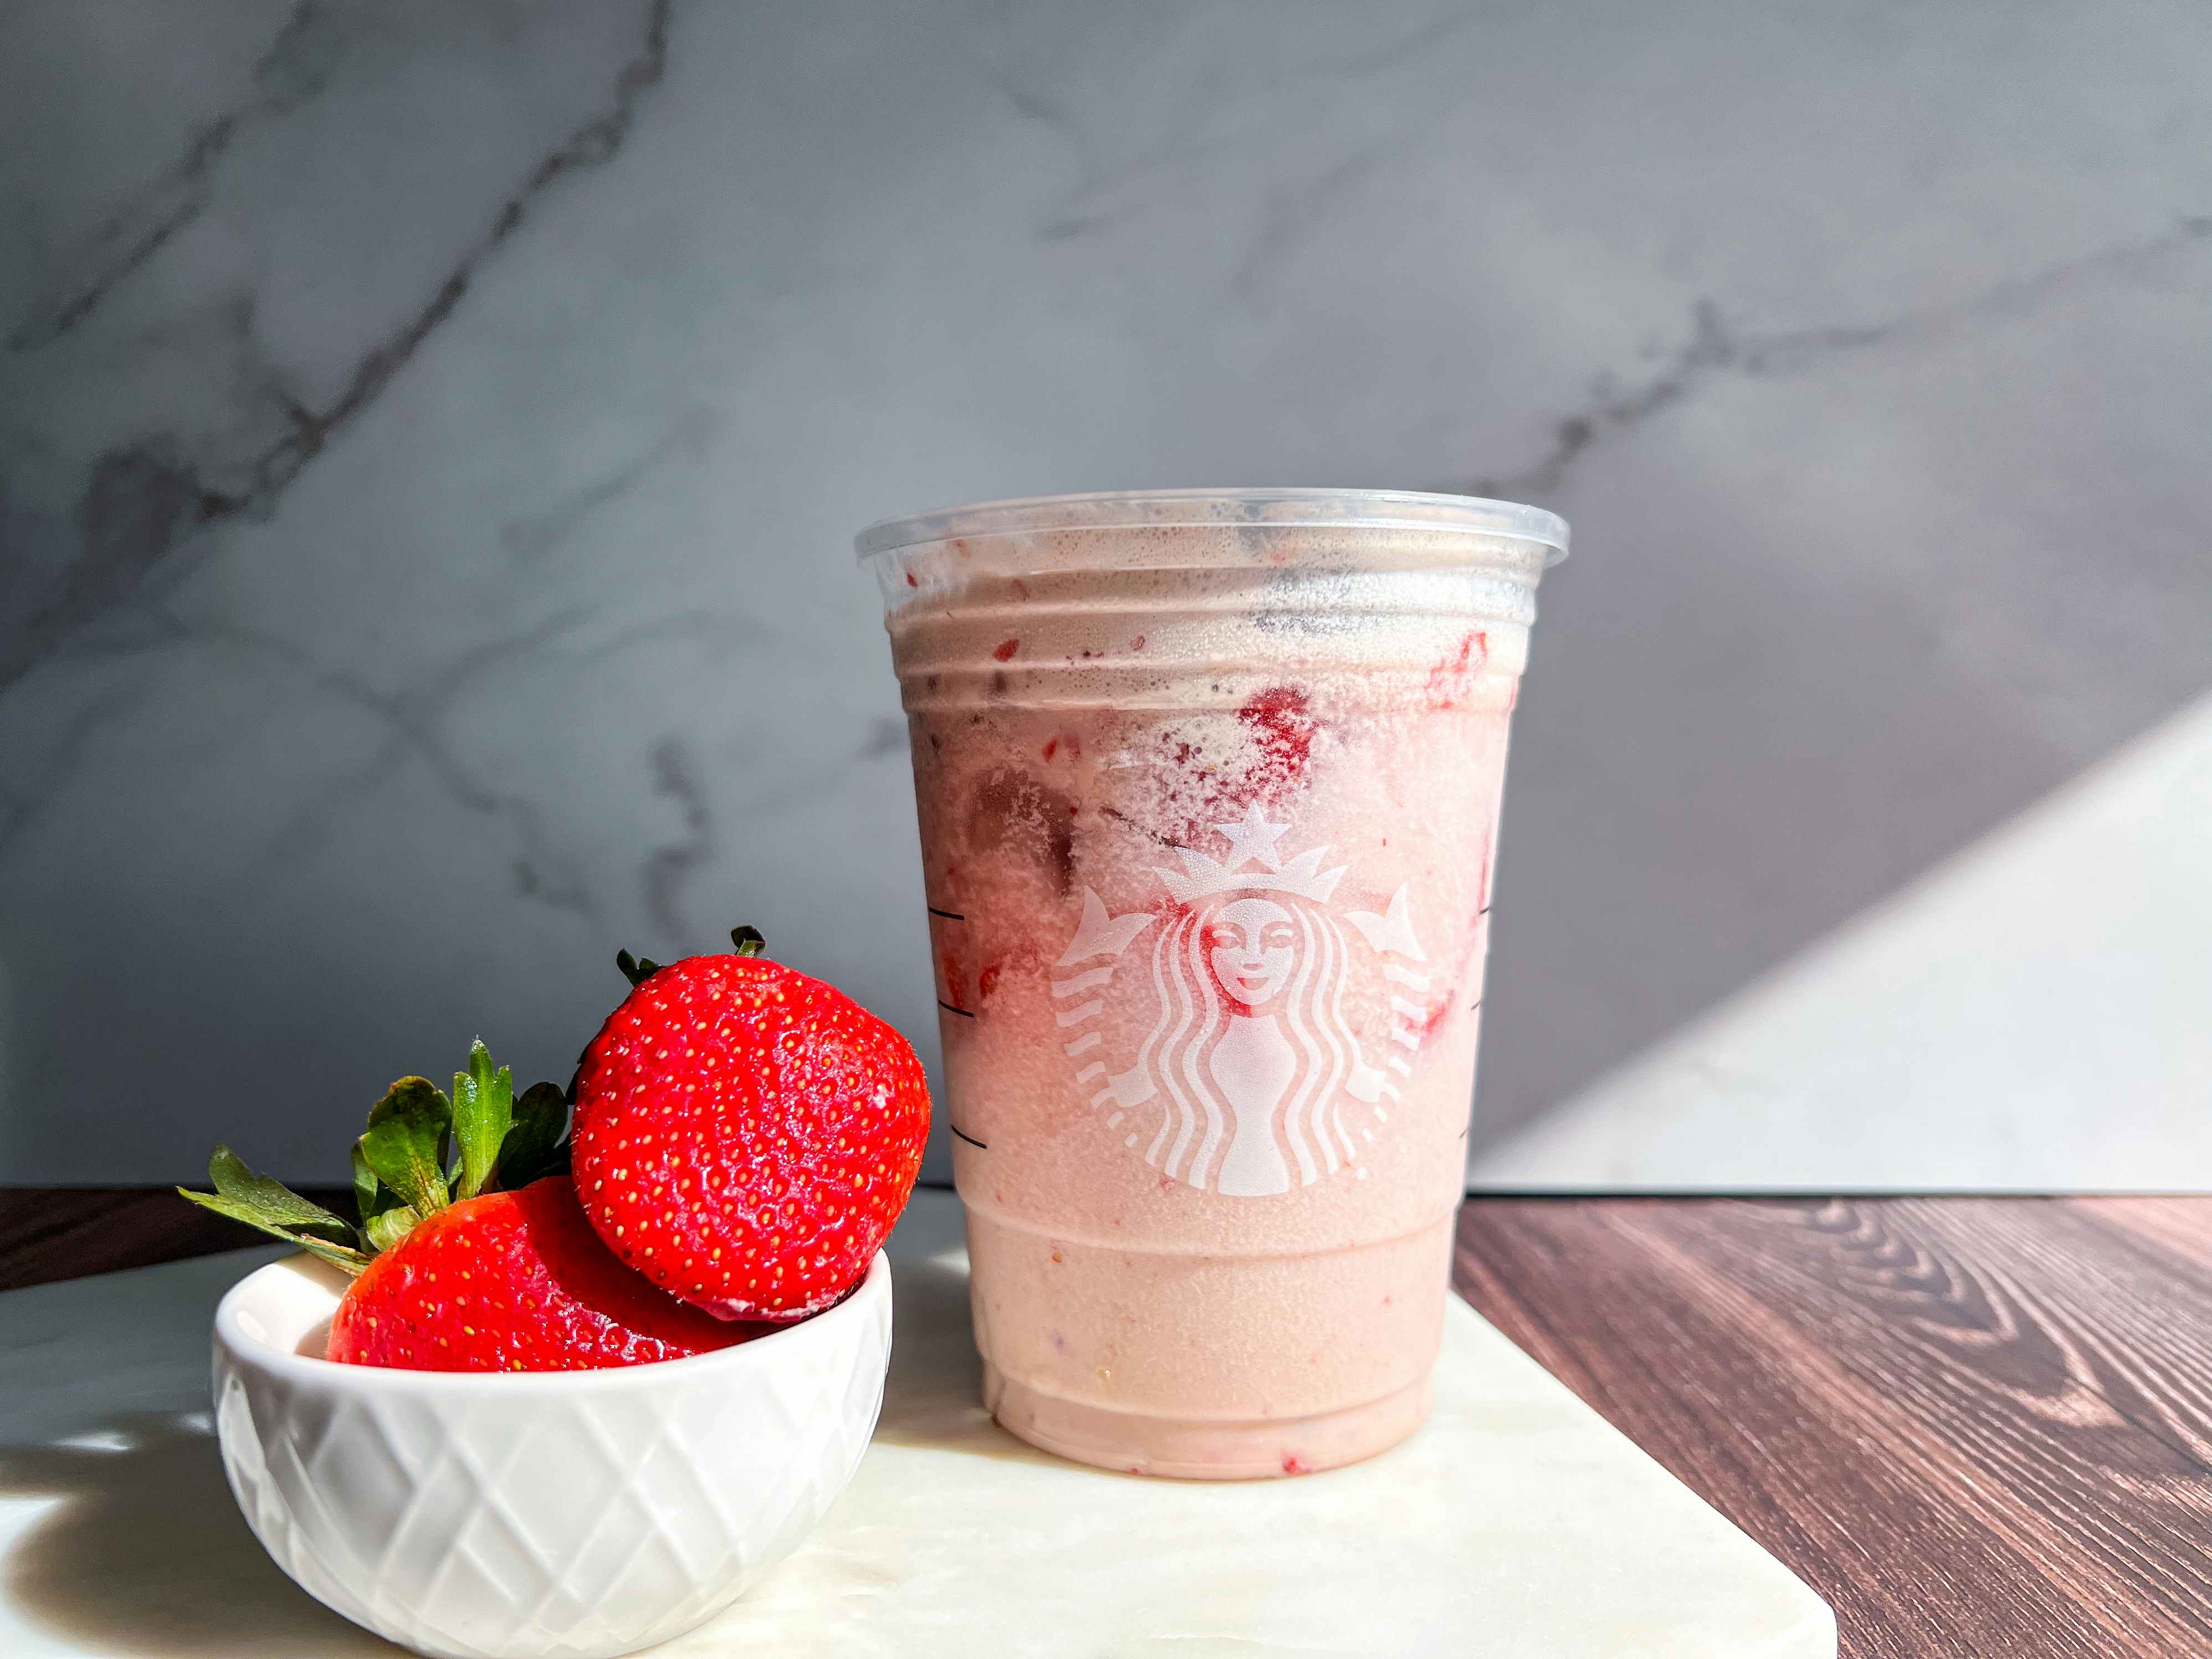 Starbucks new valentines day drink with two strawberries in a bowl